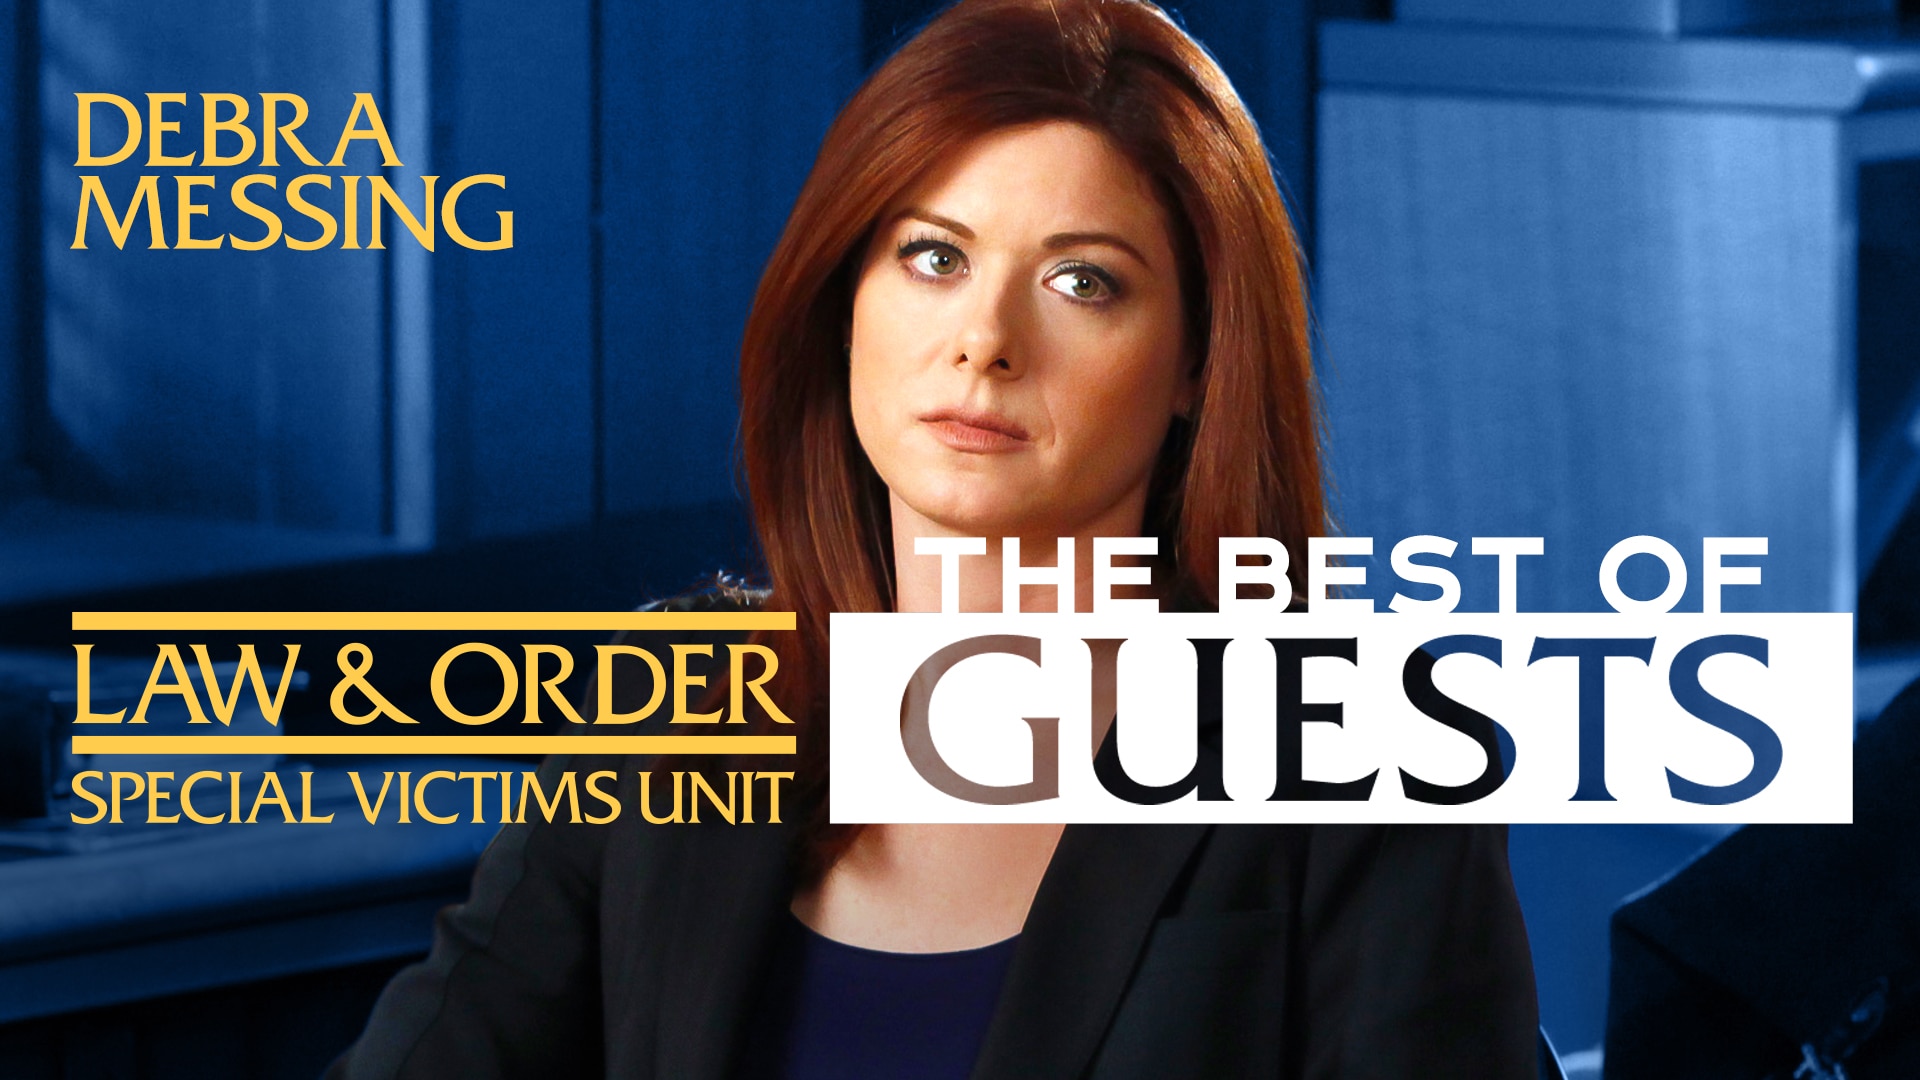 Watch Law & Order: Special Victims Unit Web Exclusive: Debra Messing Isn't  Happy with Her Benson Boost - Law & Order: SVU - NBC.com